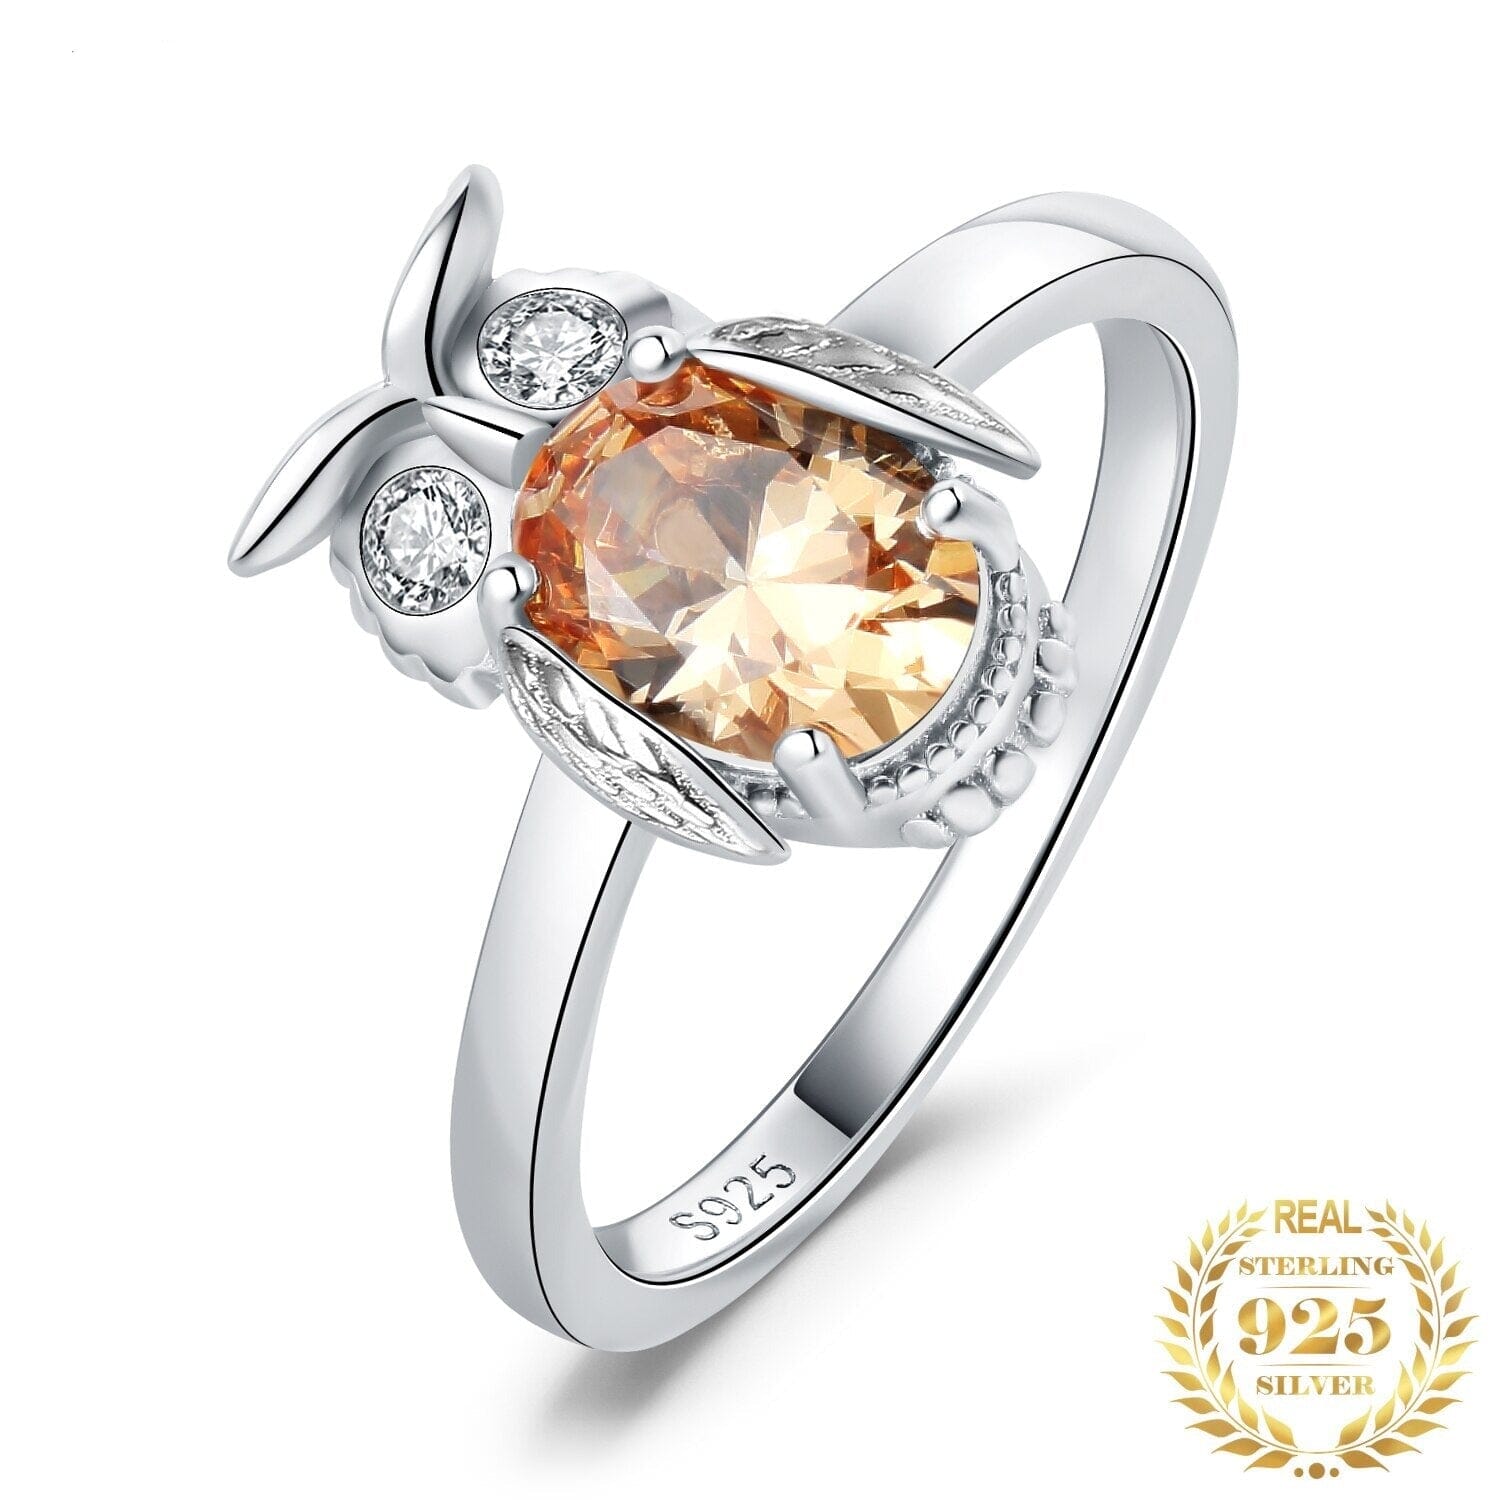 Owl 2.2ct Yellow Oval Gemstone 925 Sterling Silver RingRing5